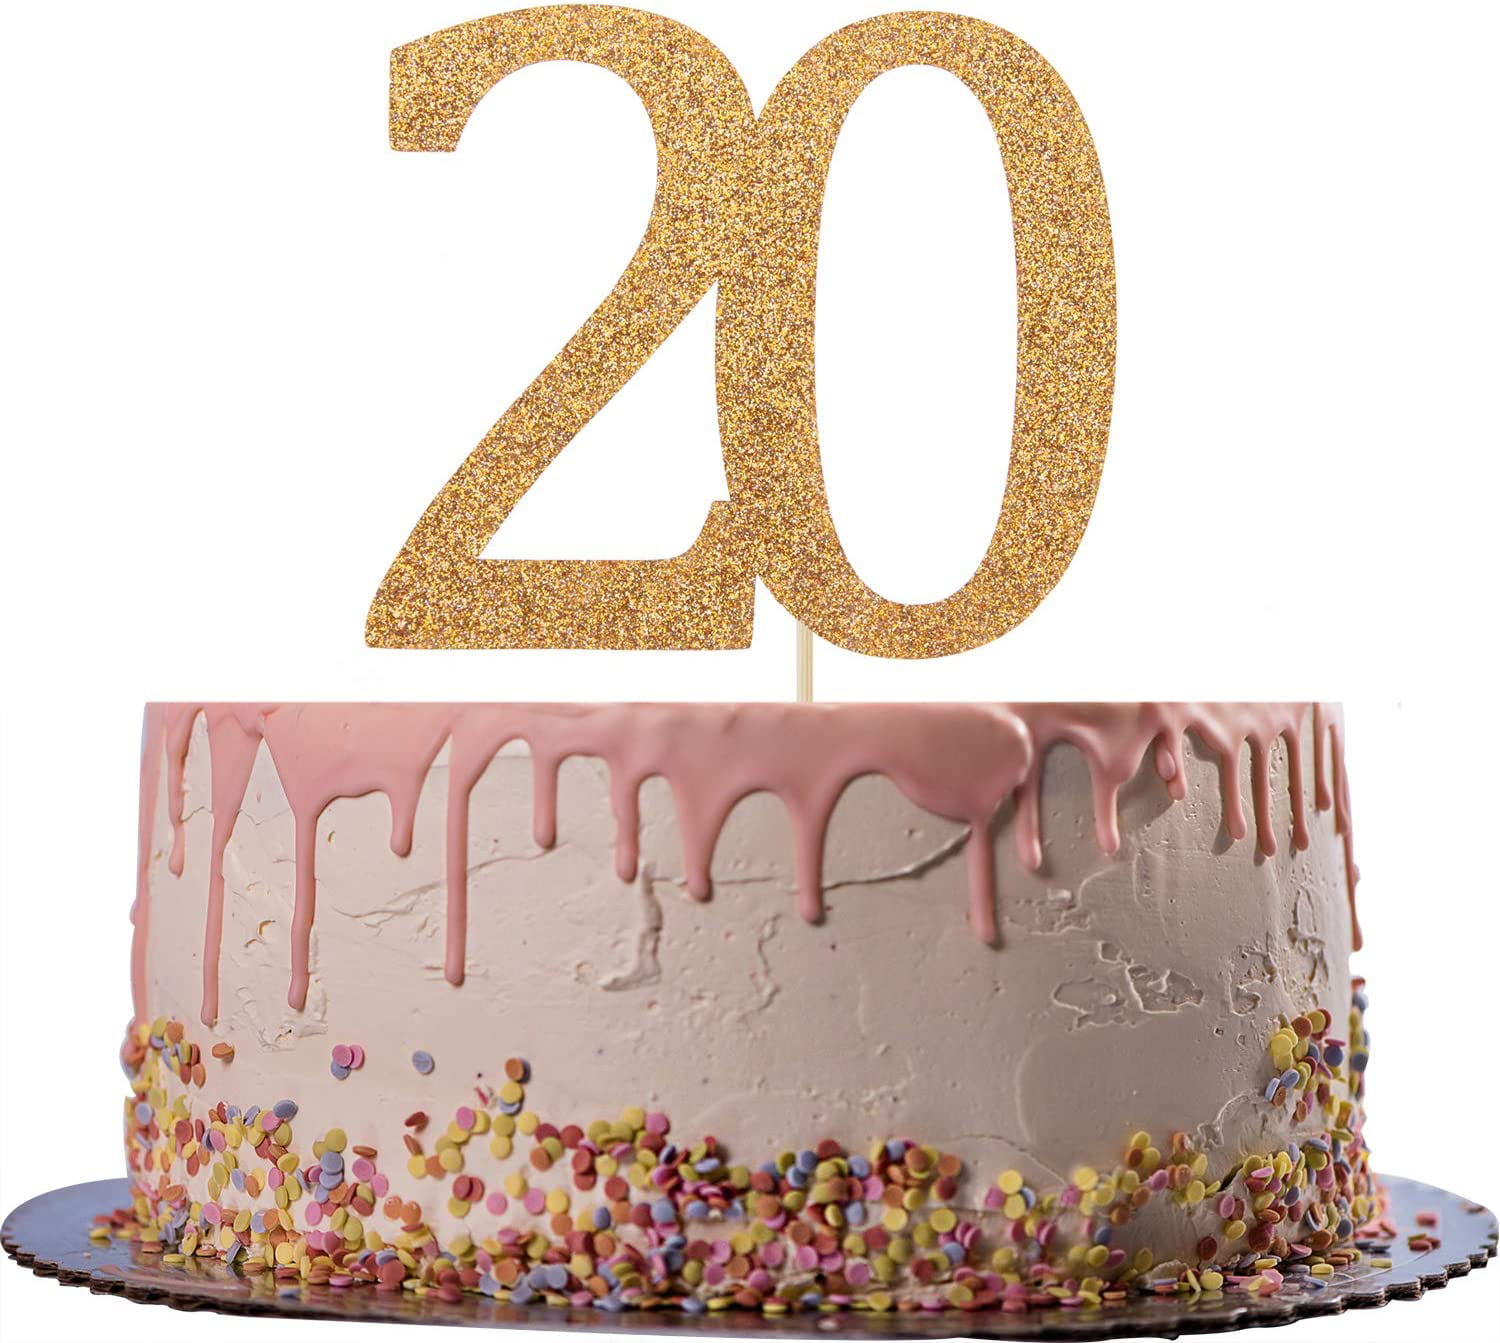 Gold 20th Birthday Candles for Cake Number 20 Giltter Candle Party Anniversary Cakes Decoration for Women or Men 